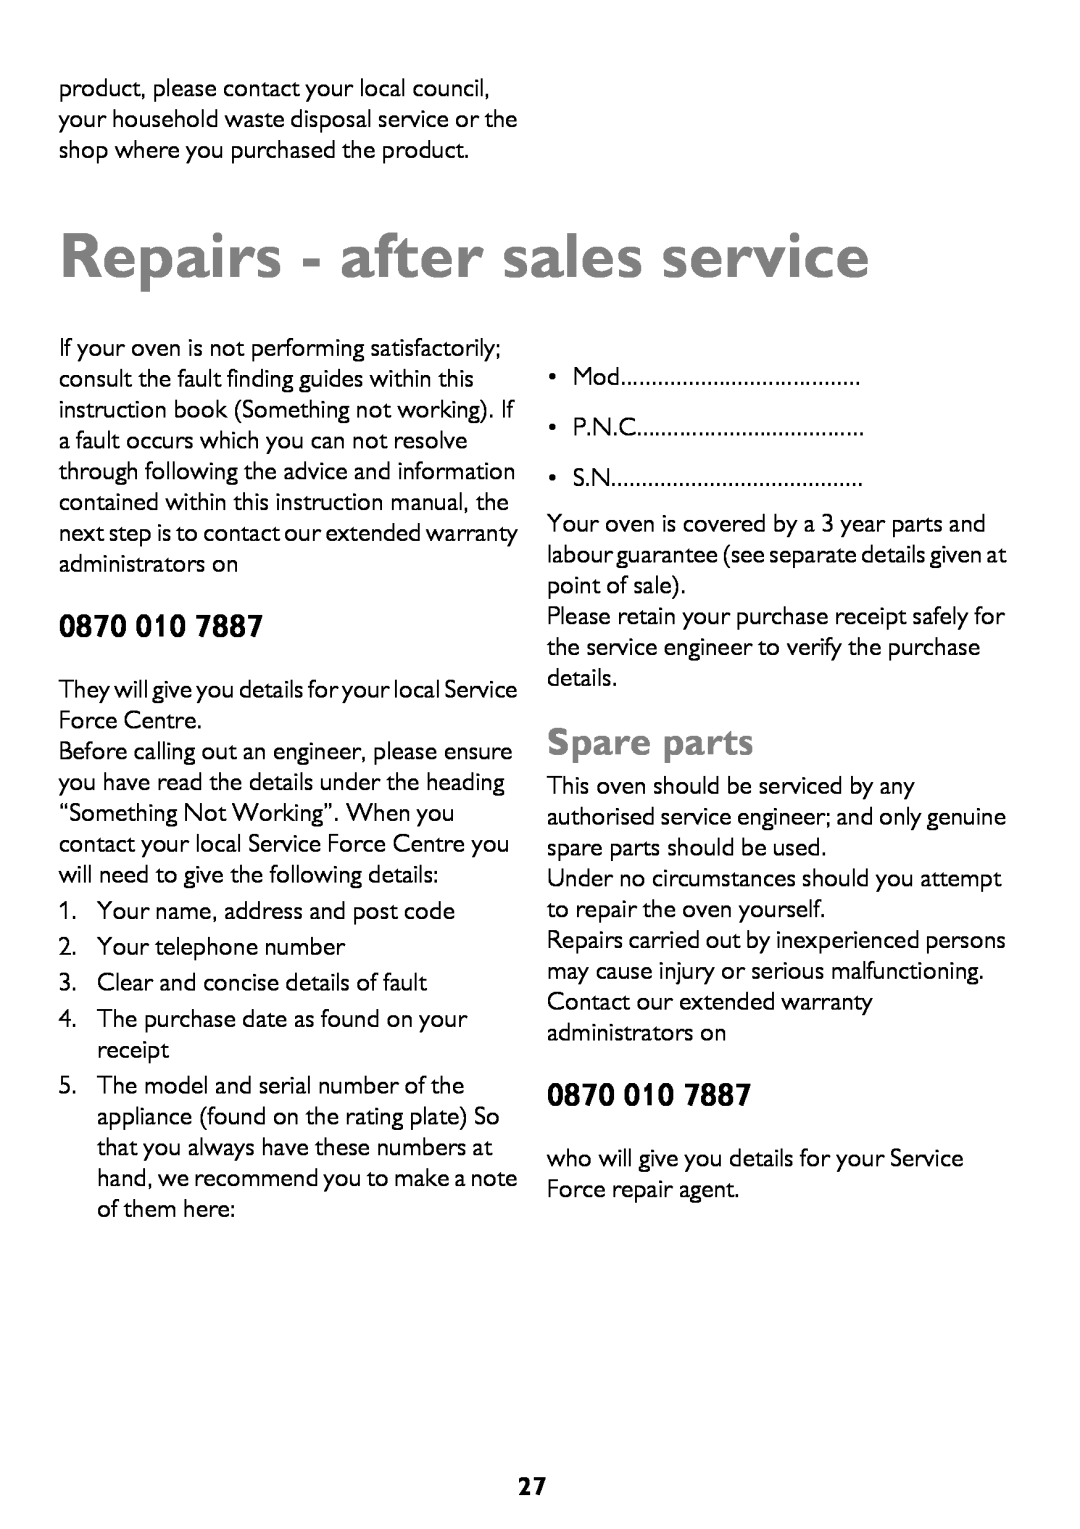 John Lewis JLBICO2 instruction manual Repairs - after sales service, Spare parts, 0870 